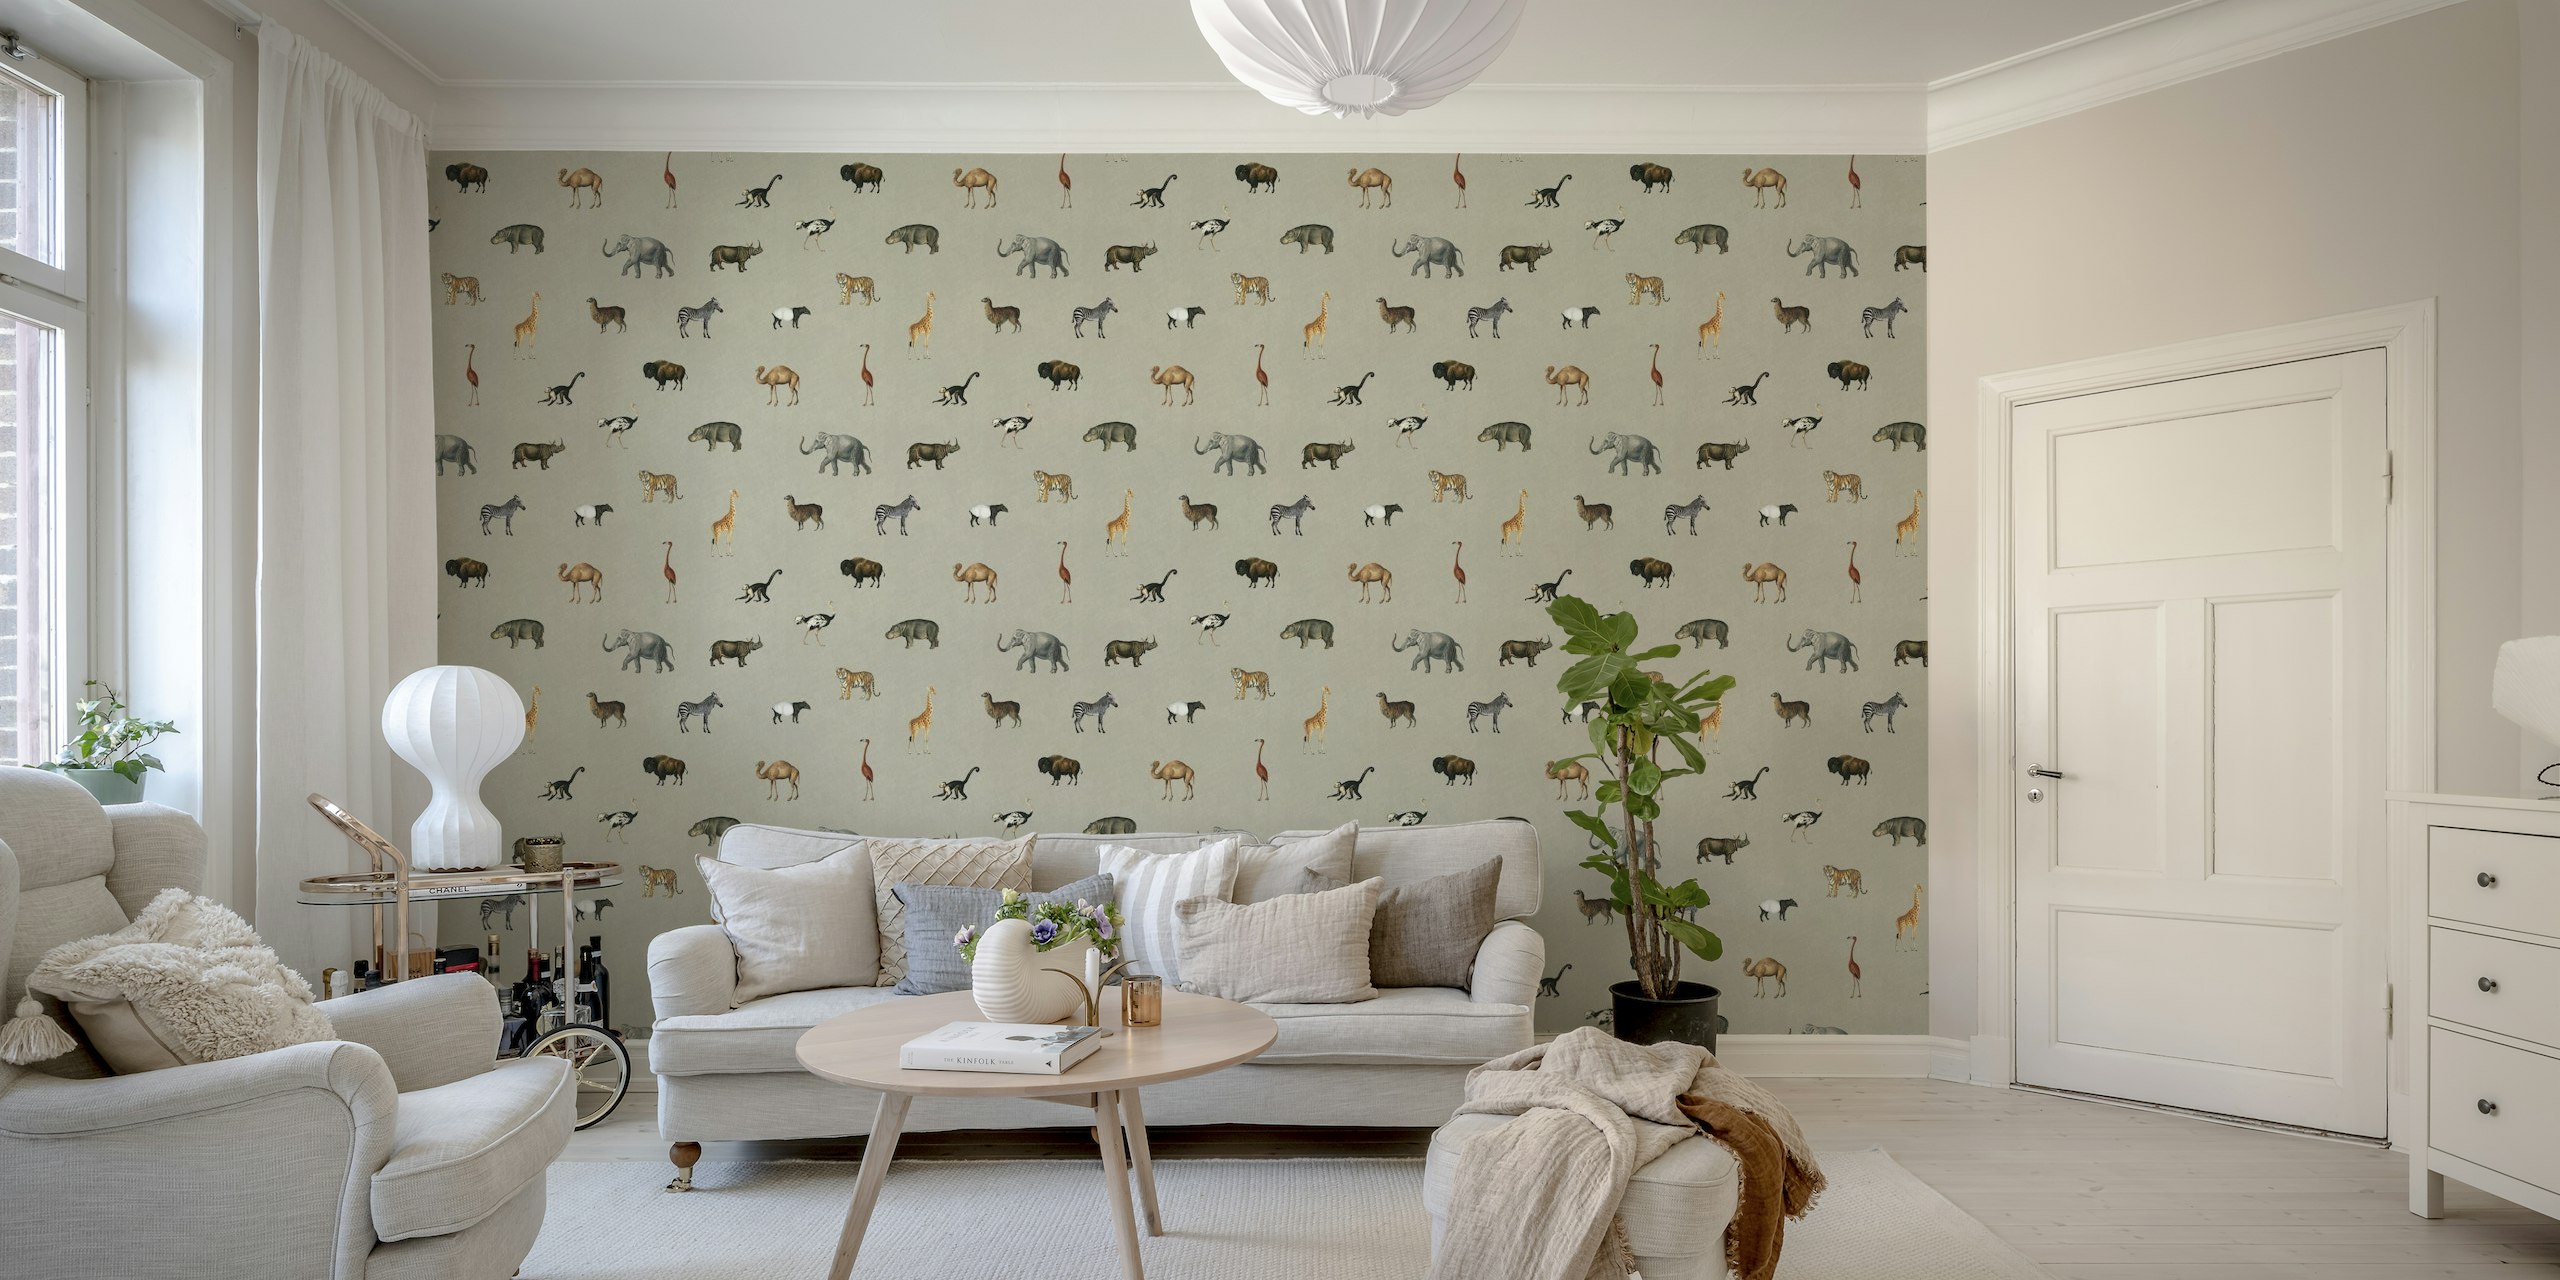 Savanna-themed wall mural with various animals in greige tones